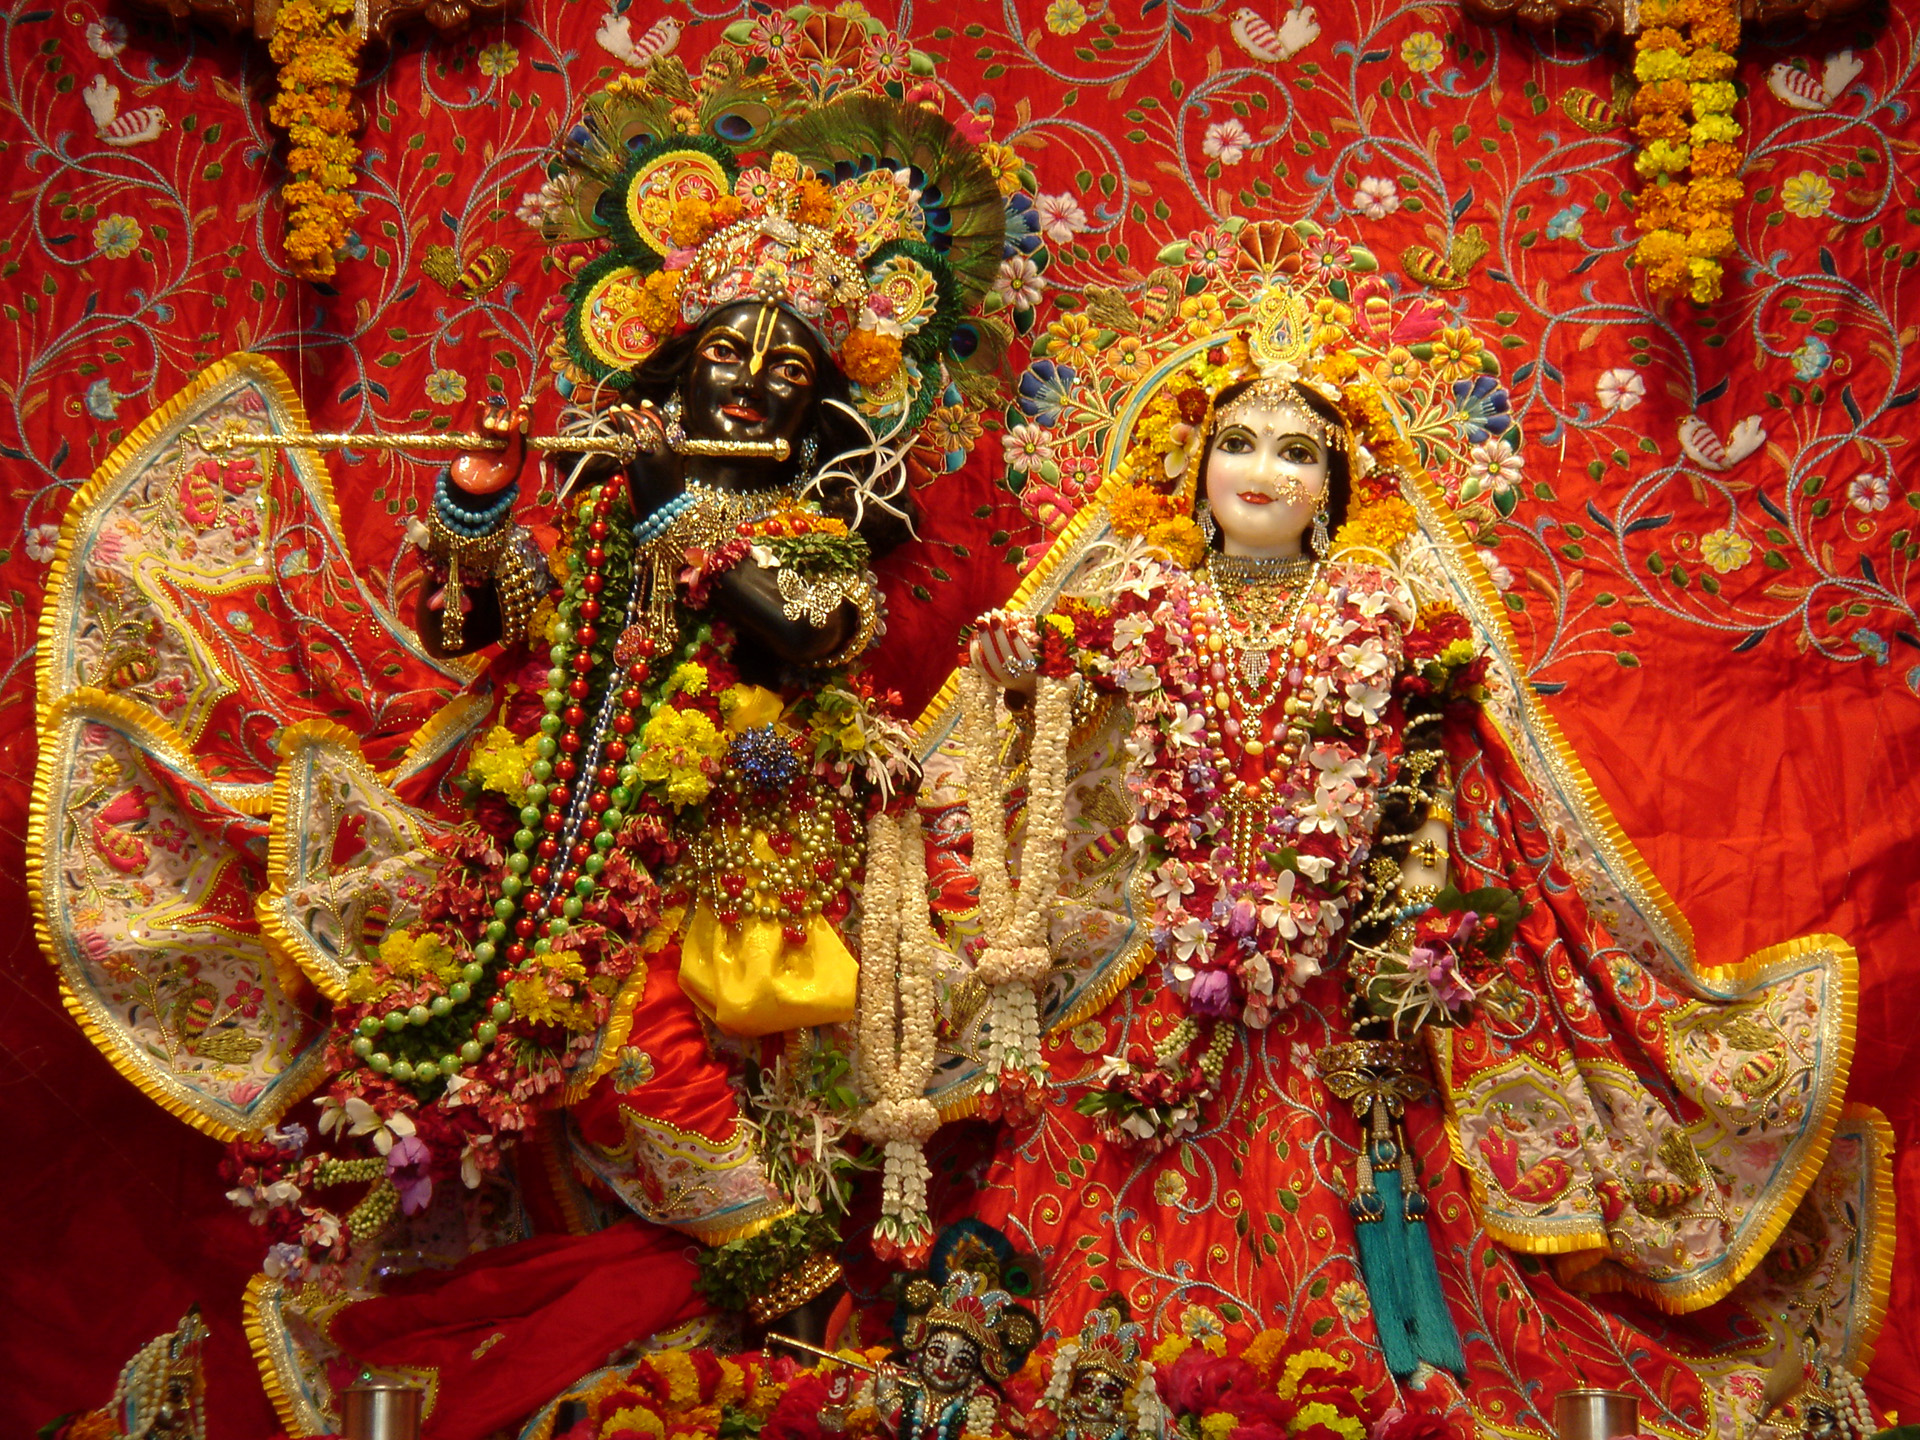 A sculpture of Krishna and Radha inside a temple in Vrindavan